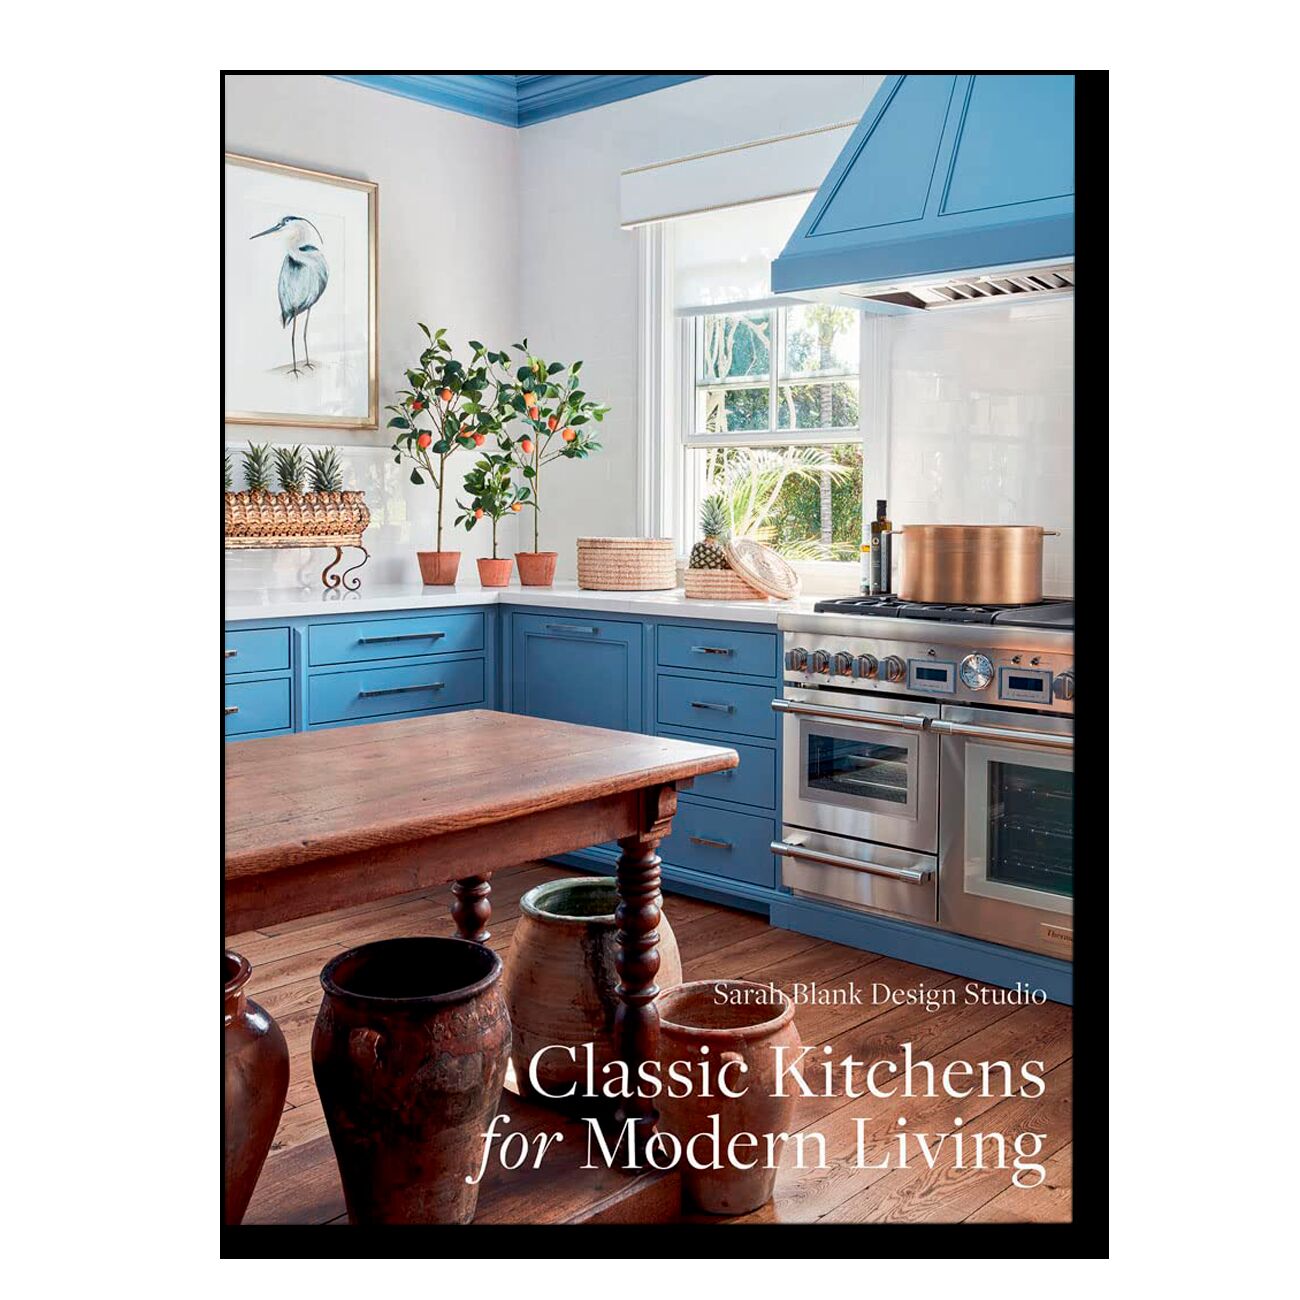 Classic Kitchens for Modern Living